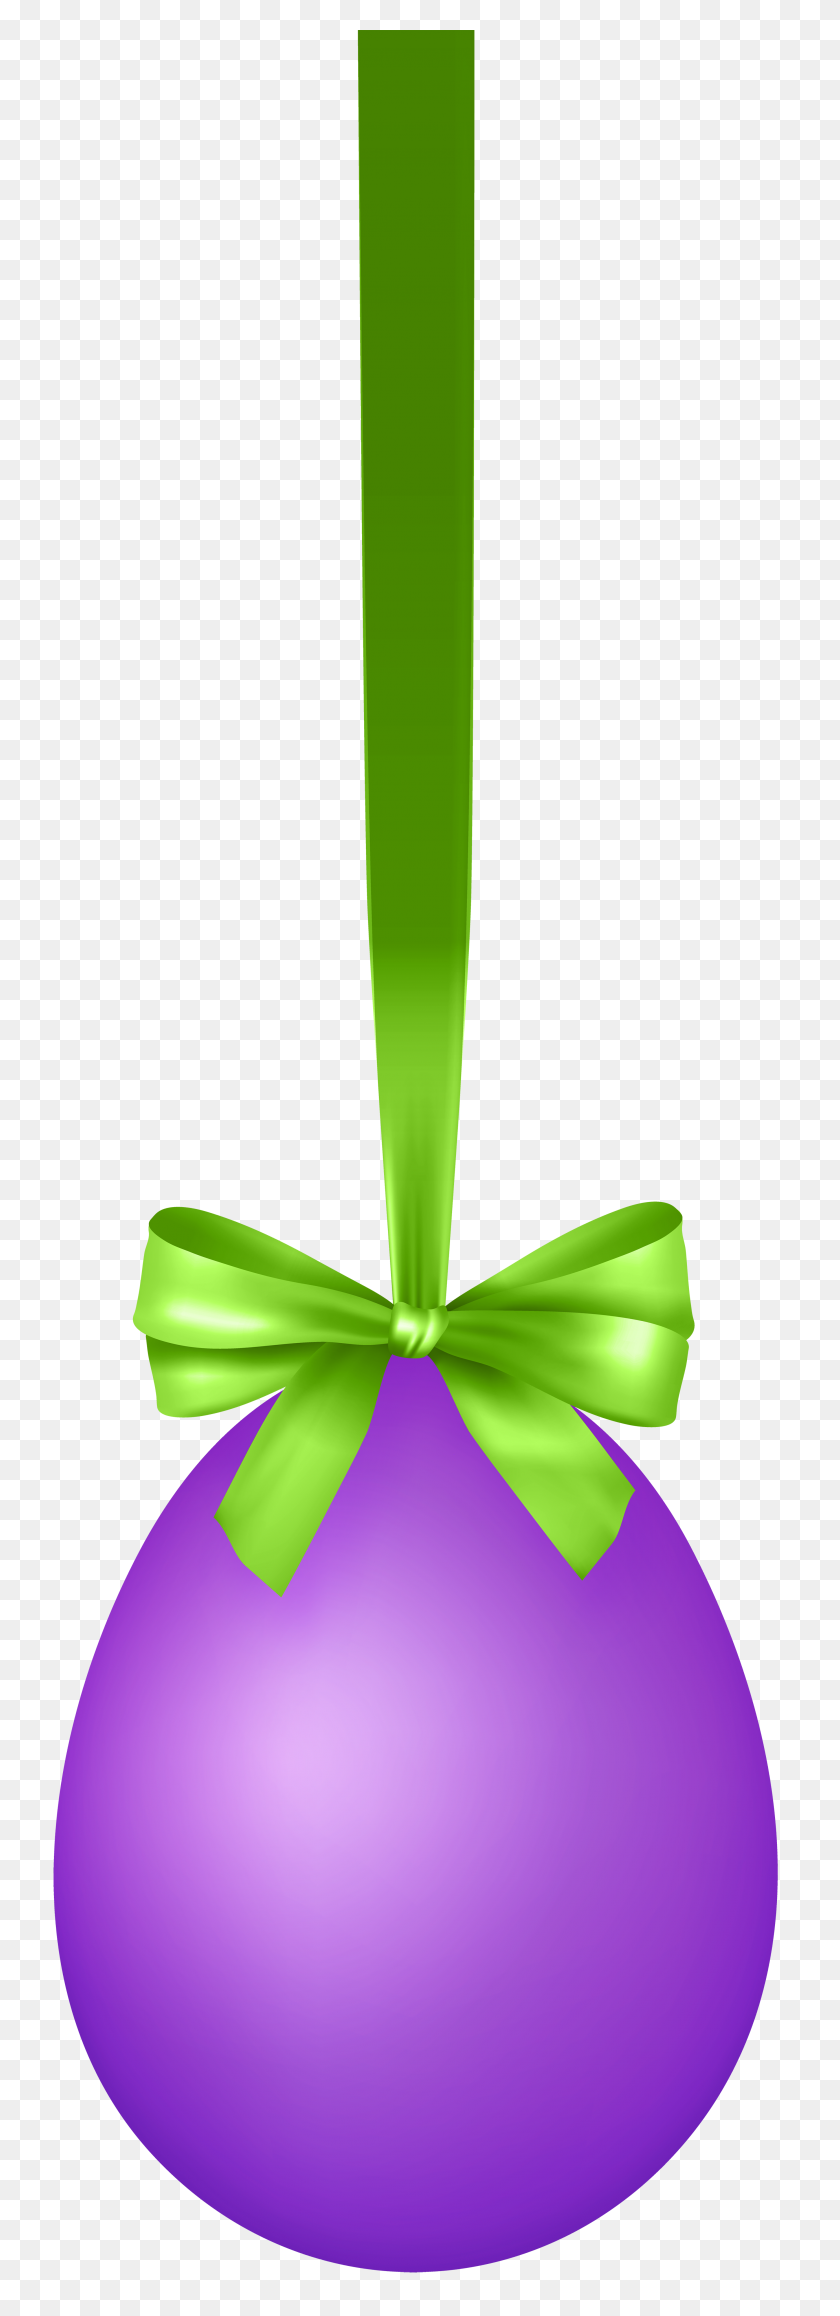 2765x8000 Easter Egg Clipart, Suggestions For Easter Egg Clipart, Download - Straight Ribbon Clipart